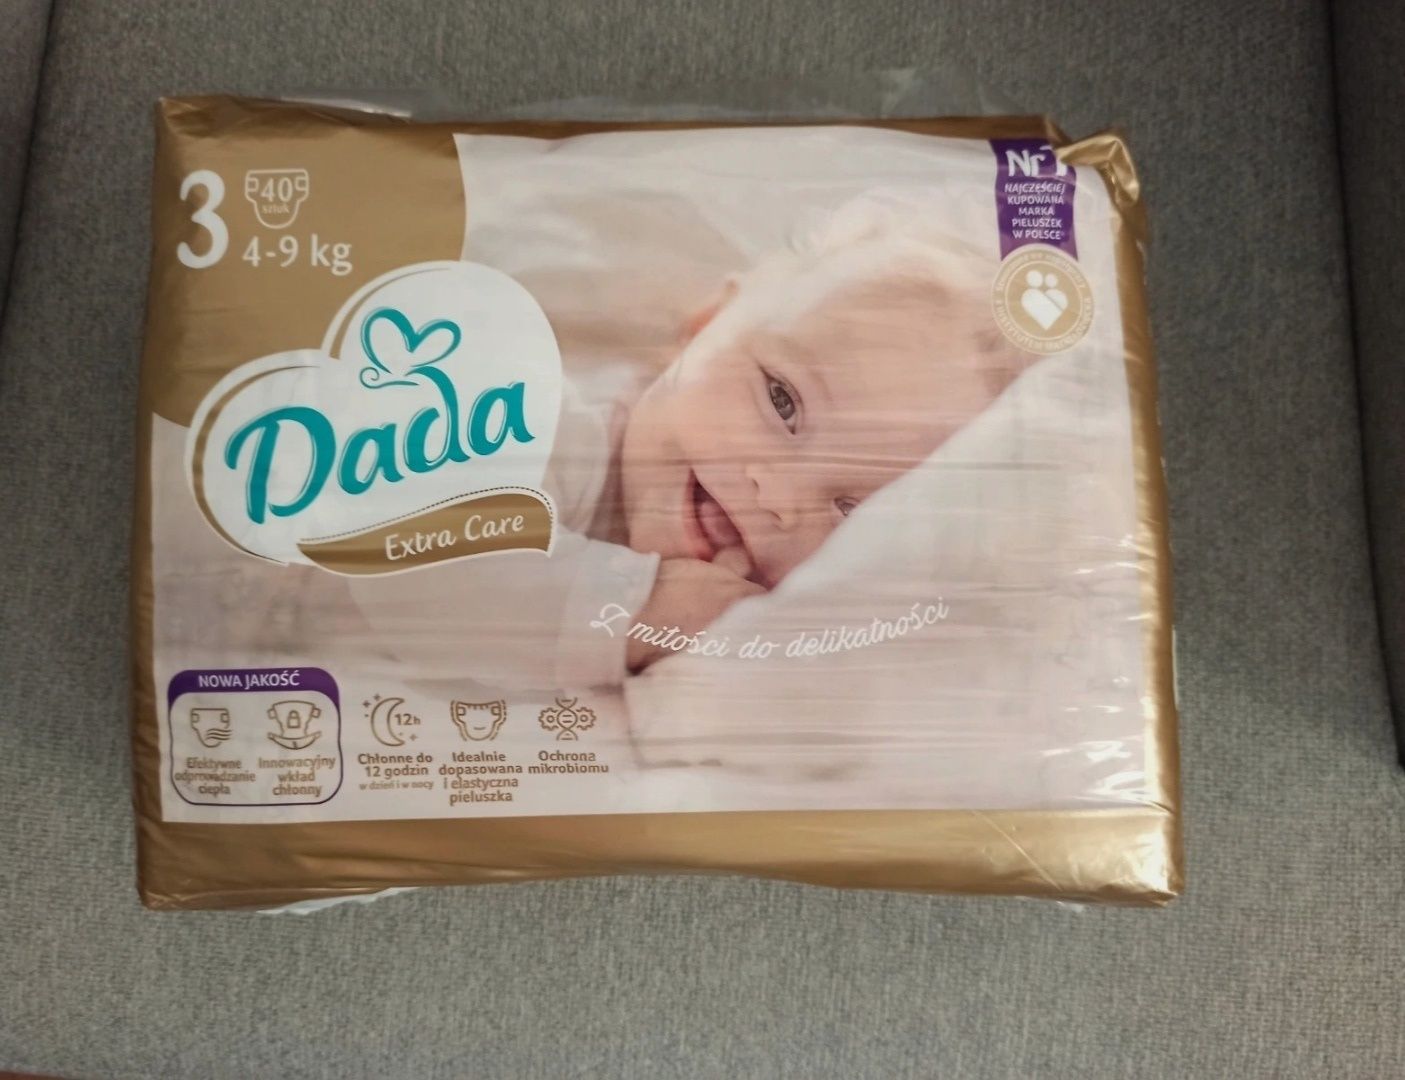 Pampers Dada extra care